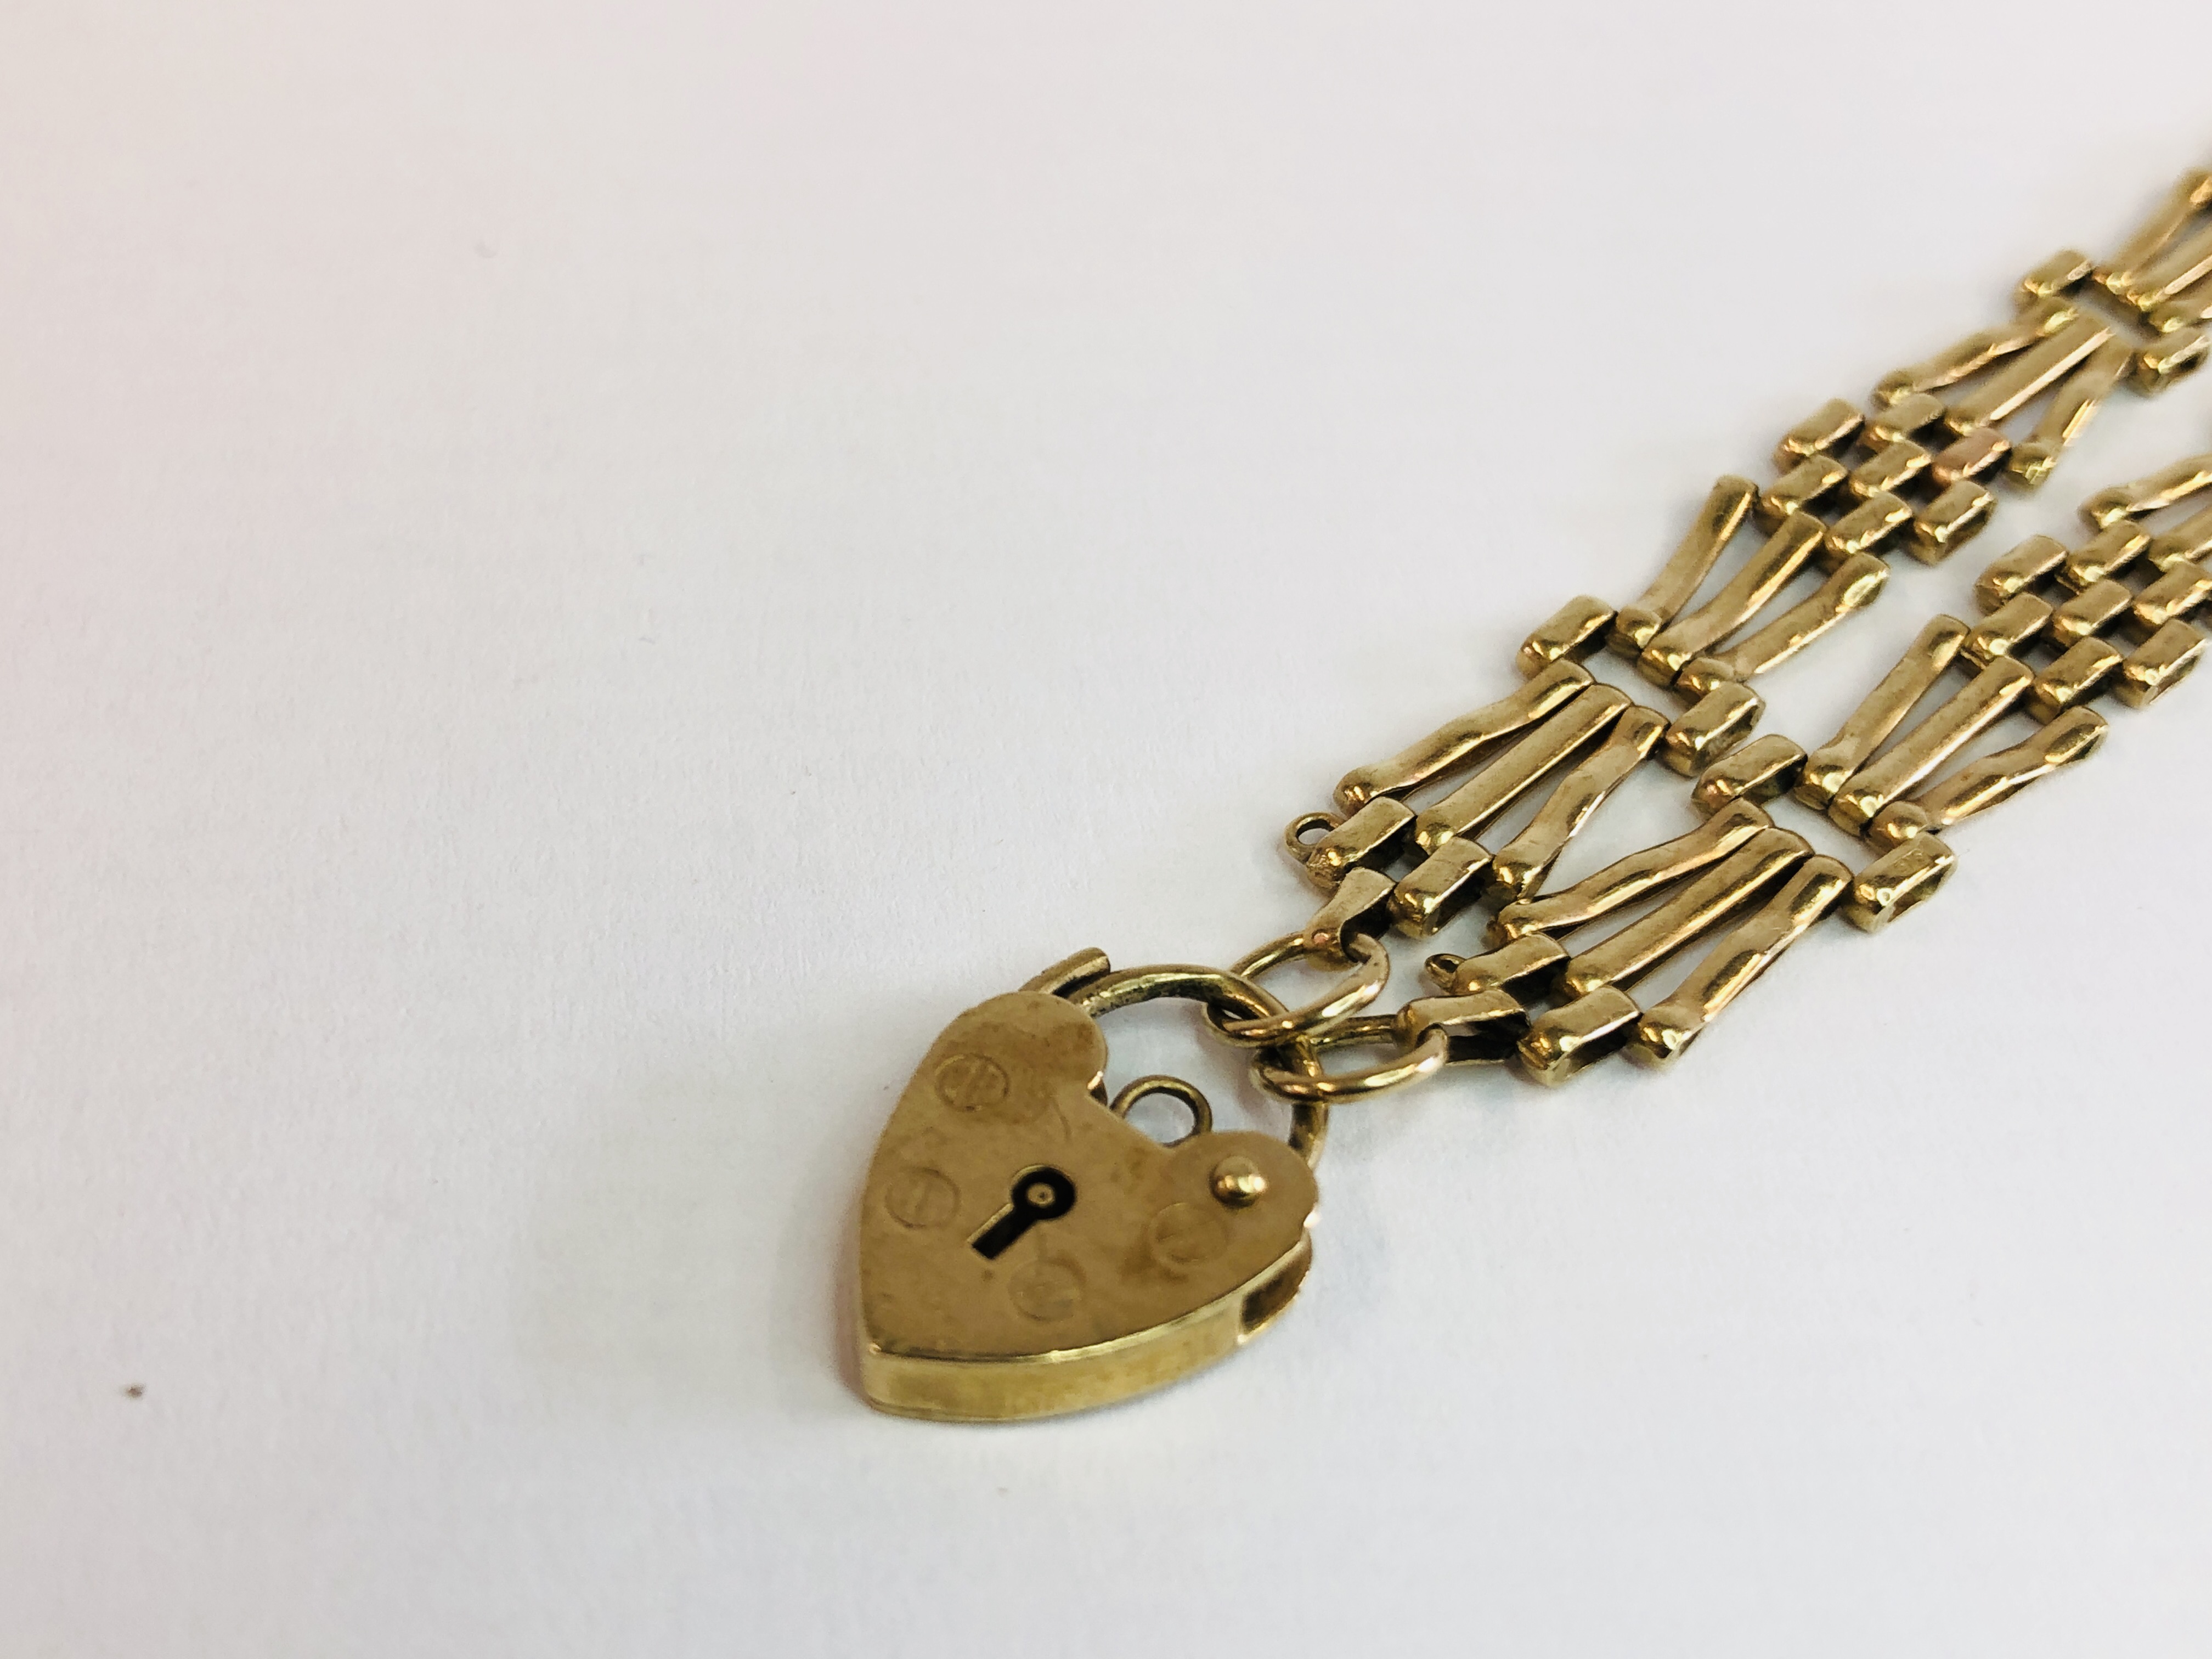 A 9CT GOLD 3 BAR GATE BRACELET AND PADLOCK CLASP - Image 2 of 8